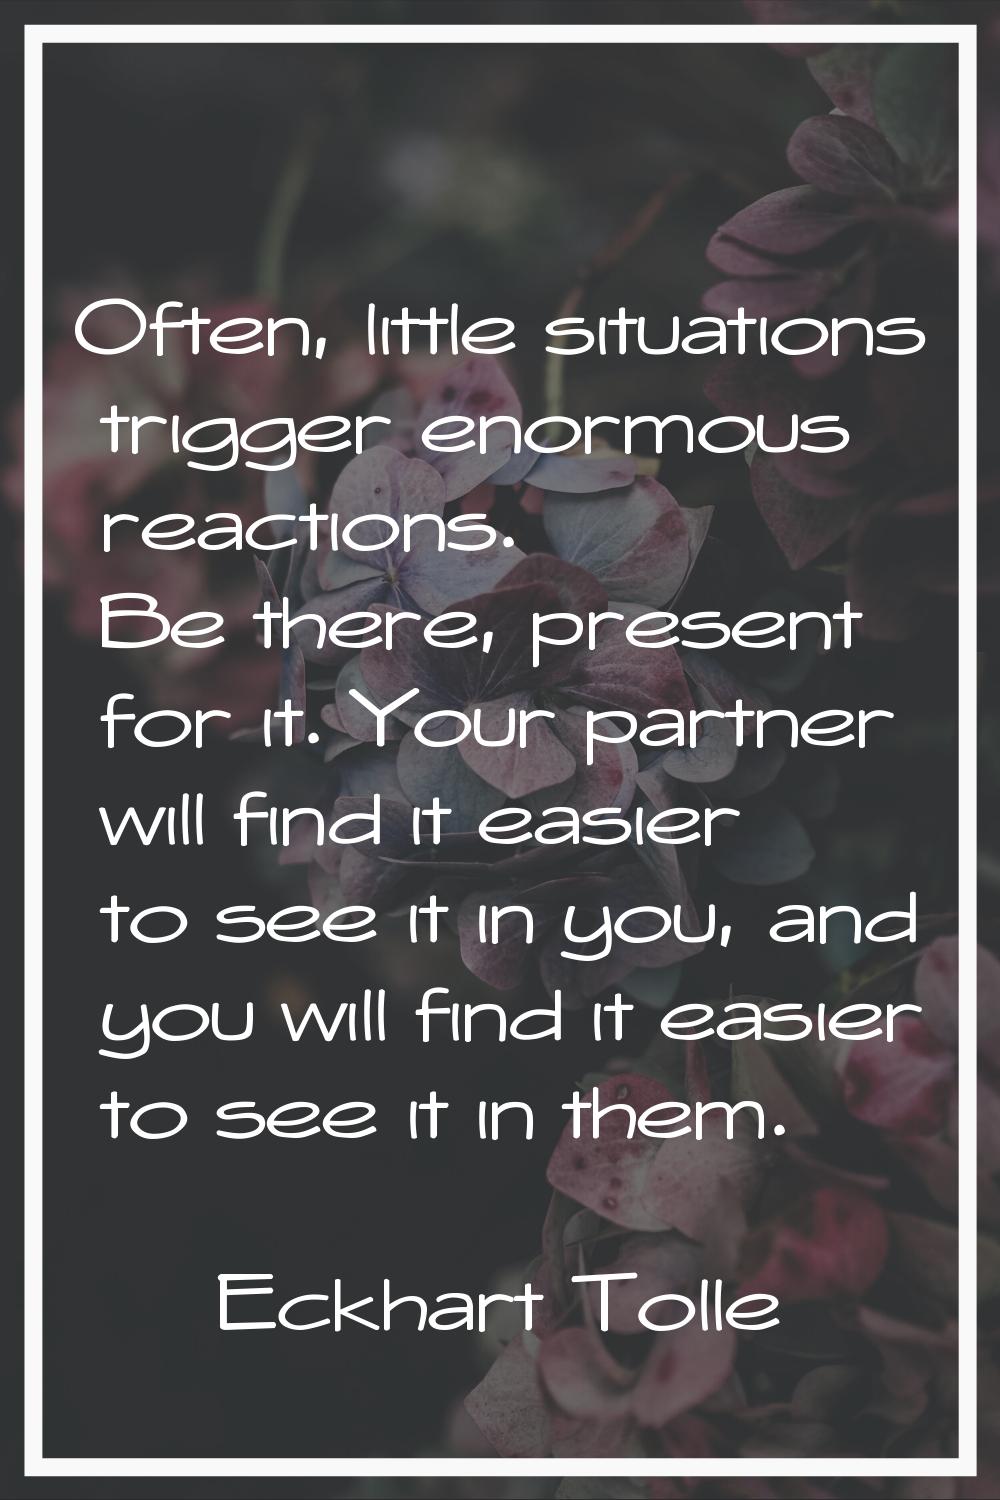 Often, little situations trigger enormous reactions. Be there, present for it. Your partner will fi